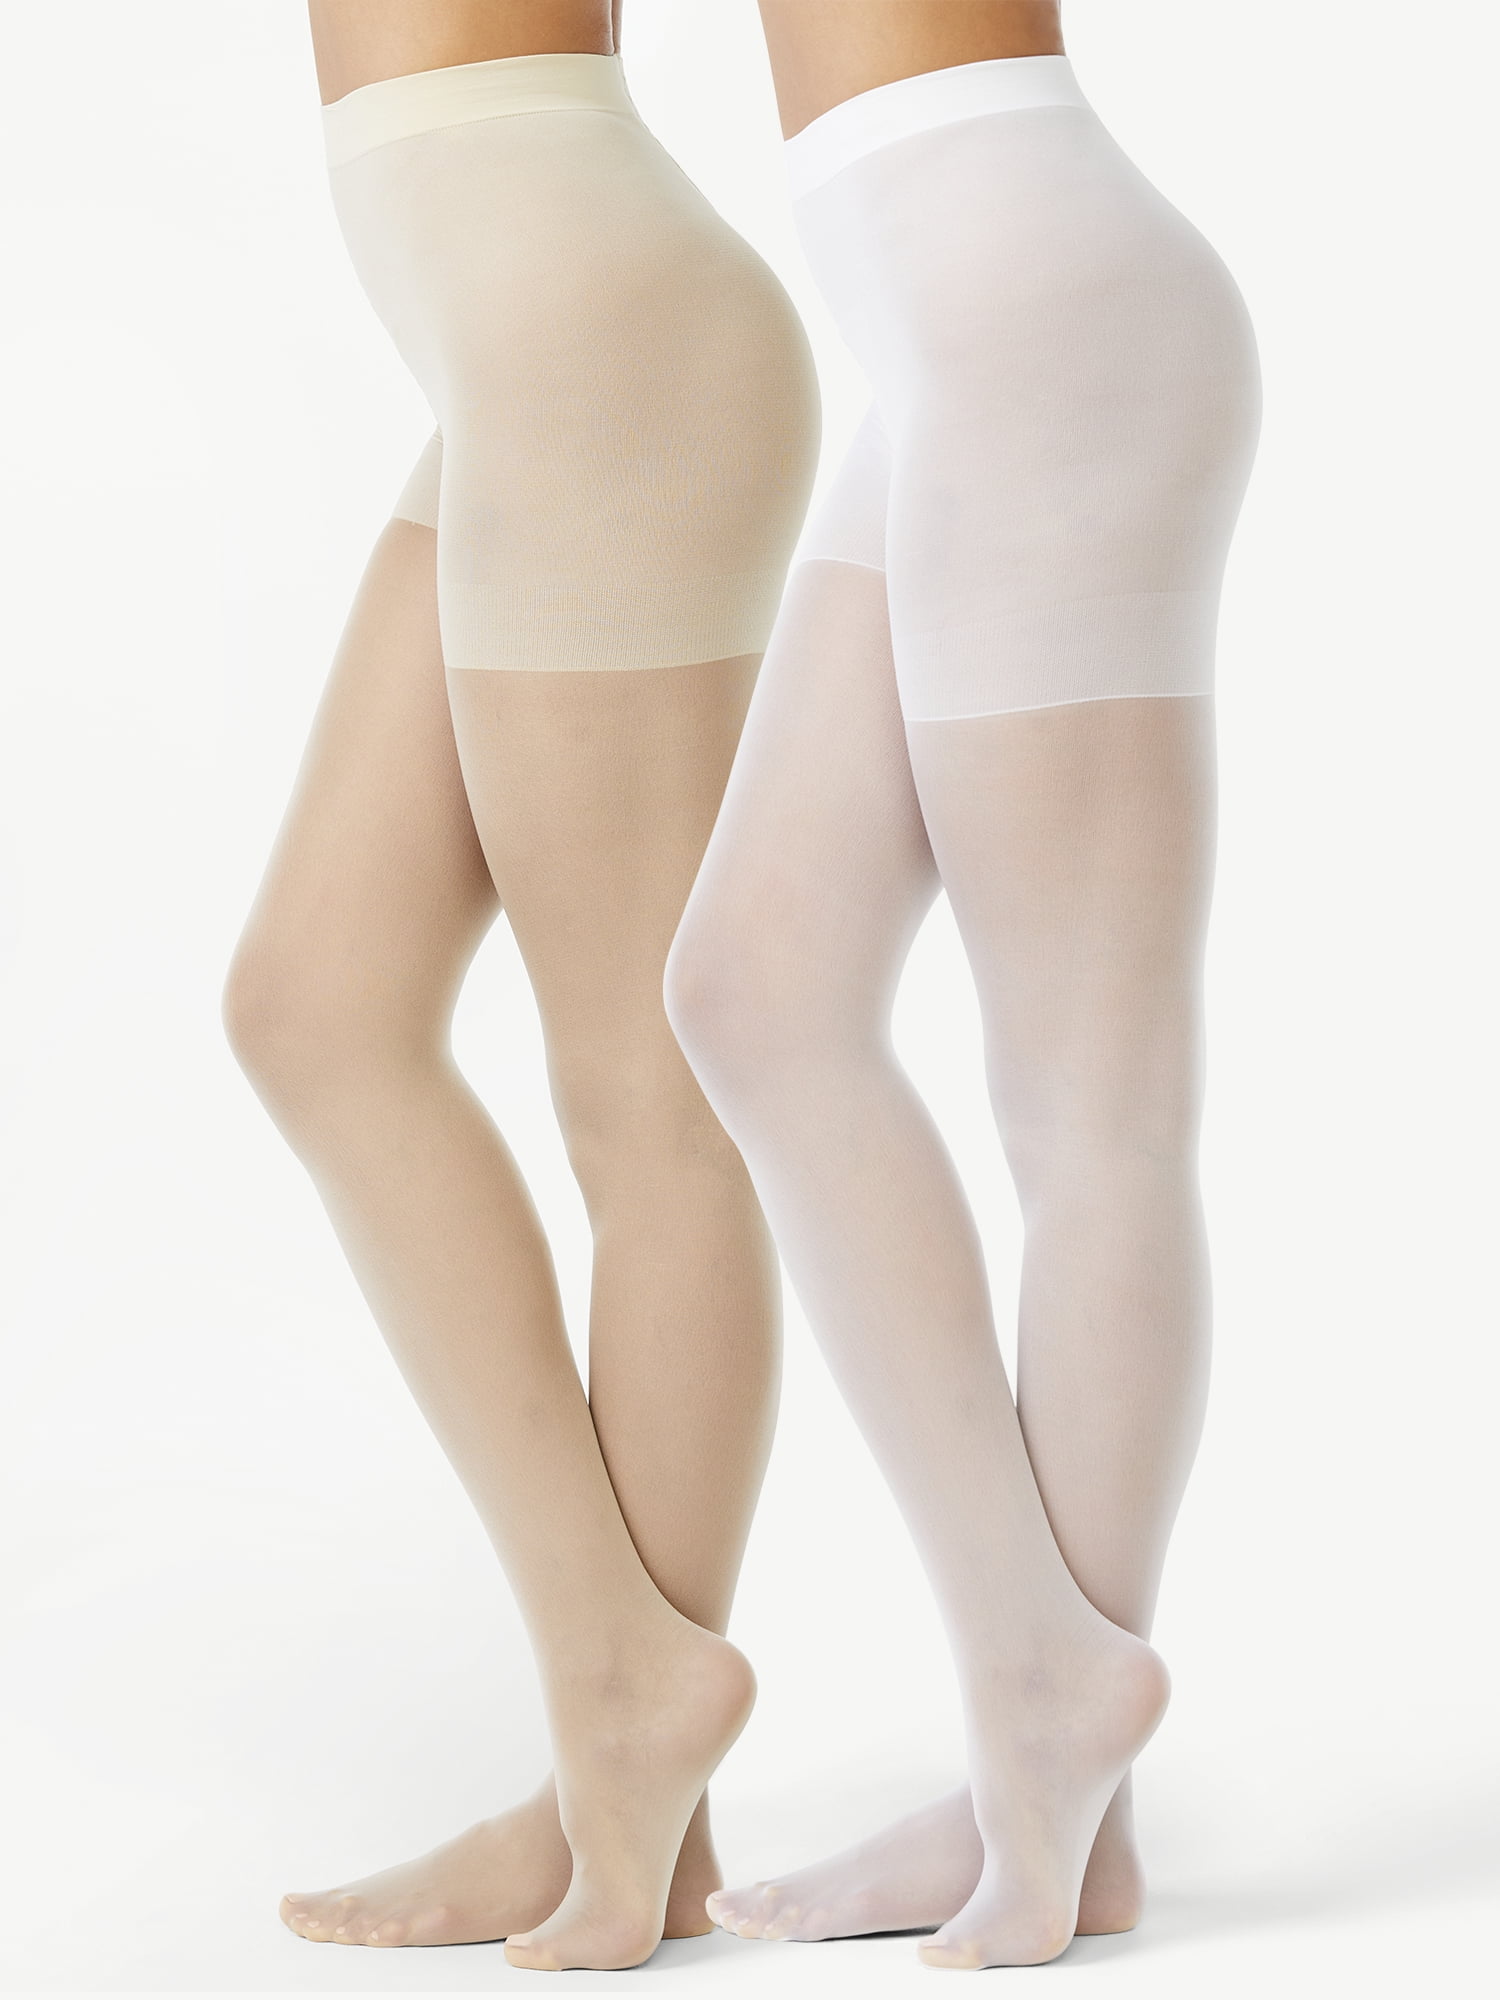 MANZI Tights for Women Tummy Control Semi-Opaque Pantyhose Pack of 2